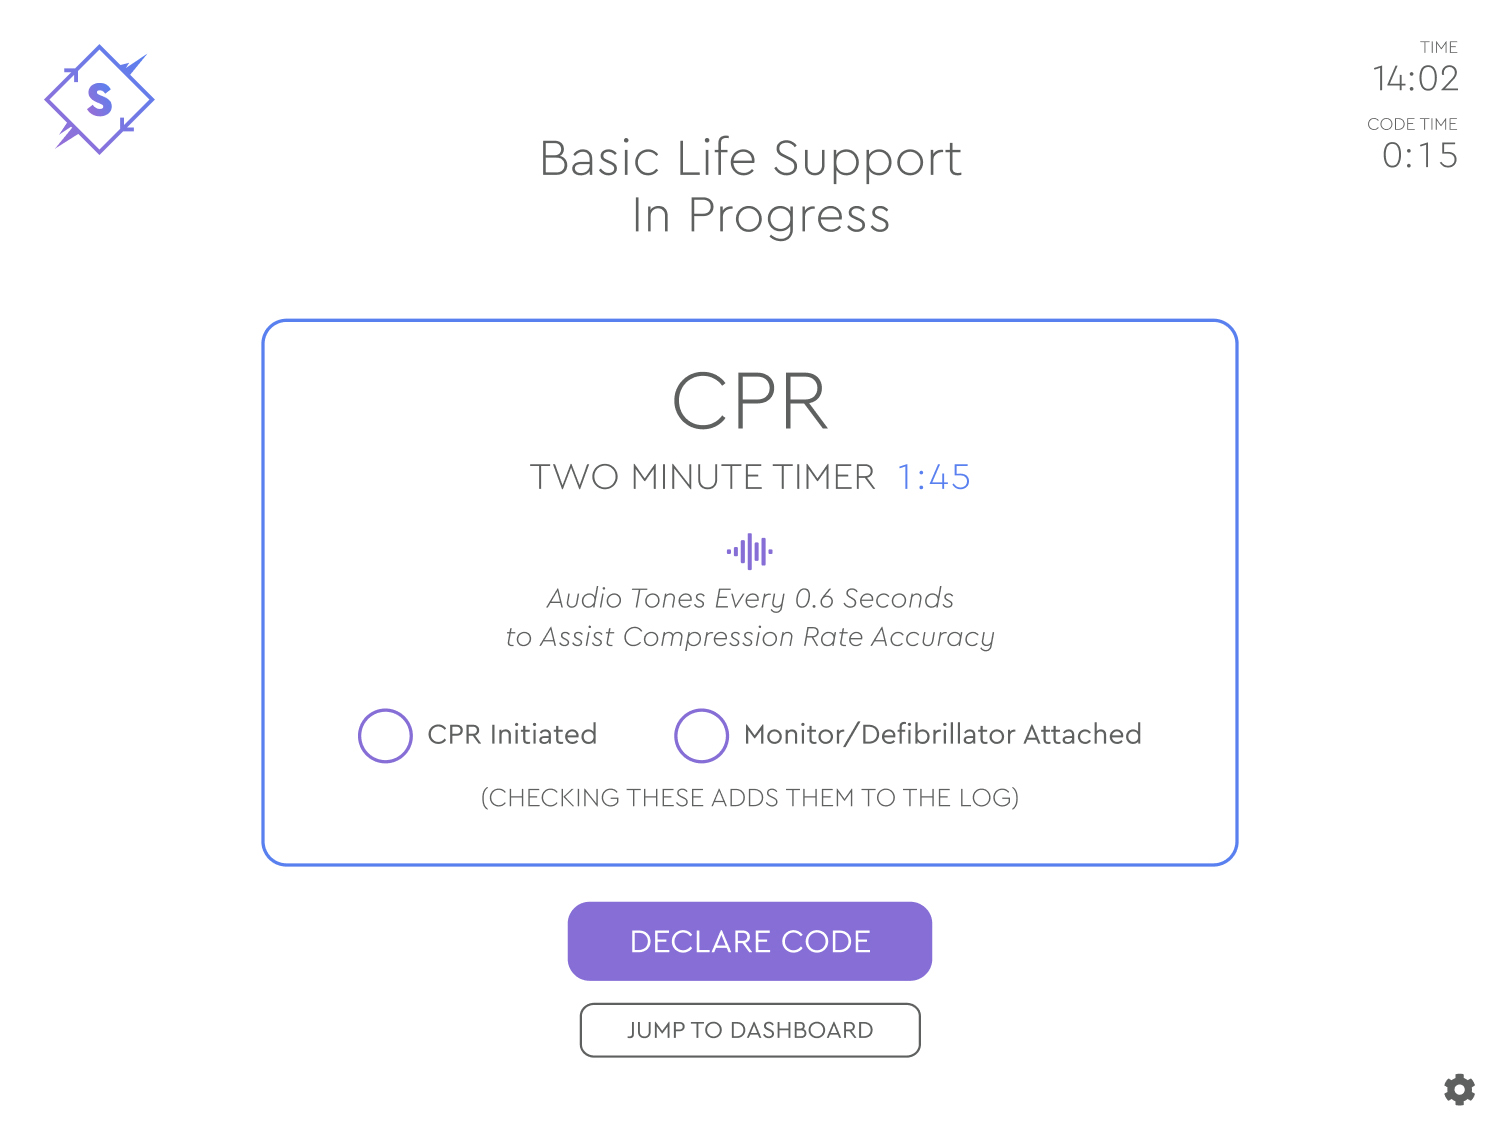 Project image for Synchronize, CPR Progress Screen on iPad Pro.